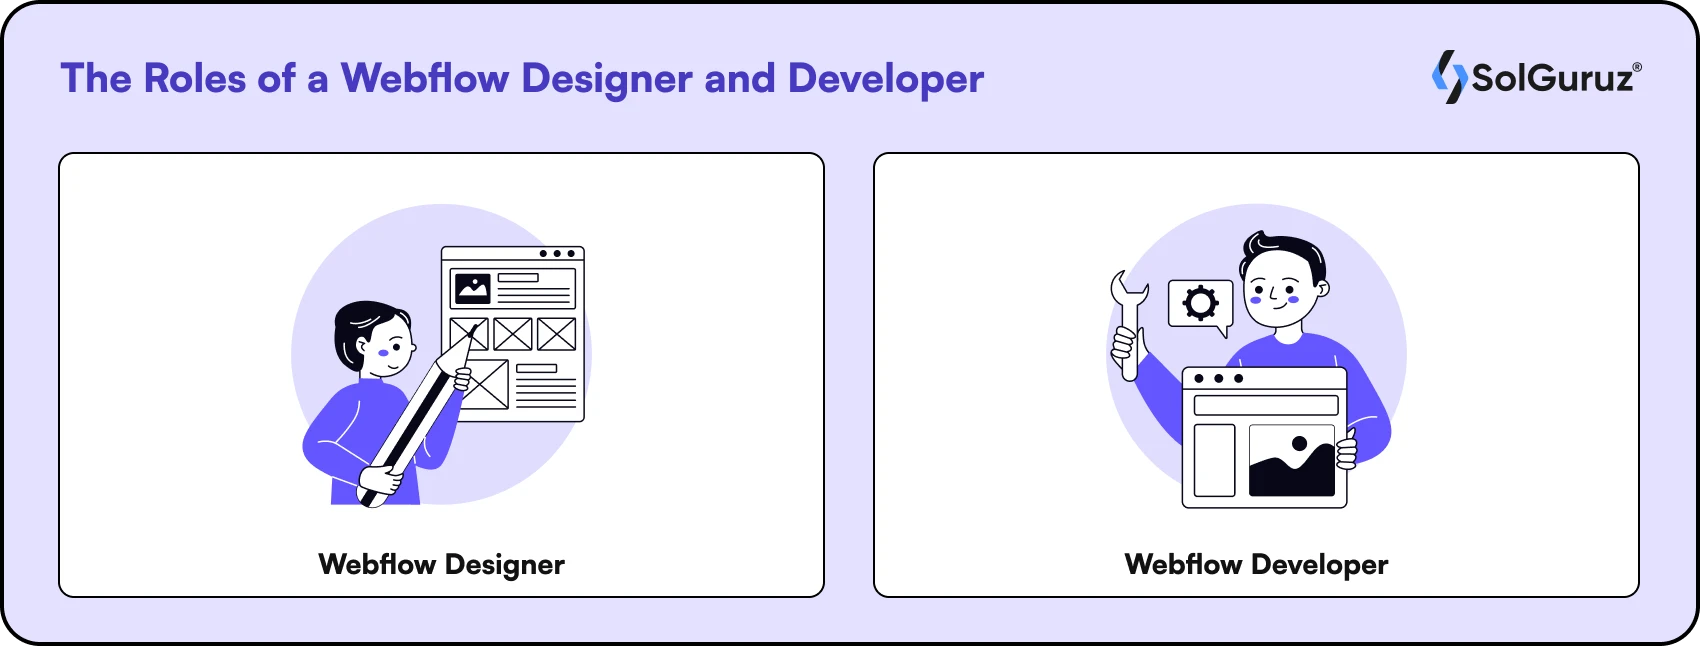 The Roles of a Webflow Designer and Developer